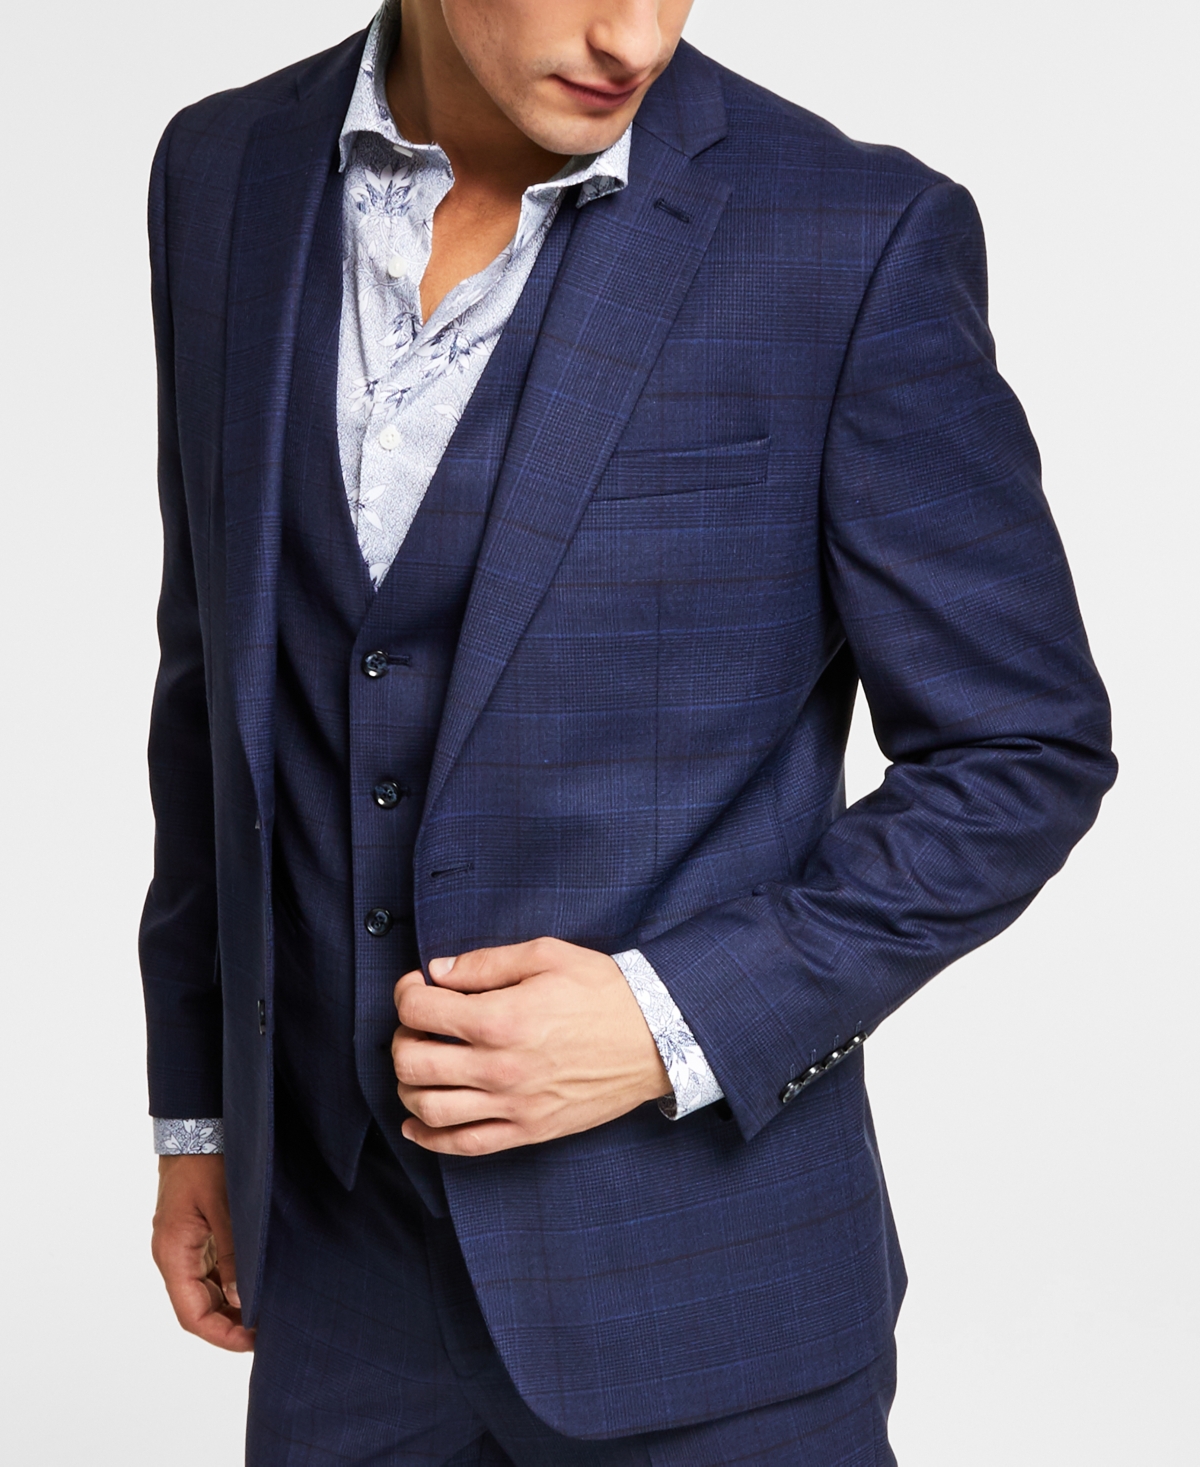 Men's Slim-Fit Wool Suit Jacket, Created for Macy's - Navy Plaid